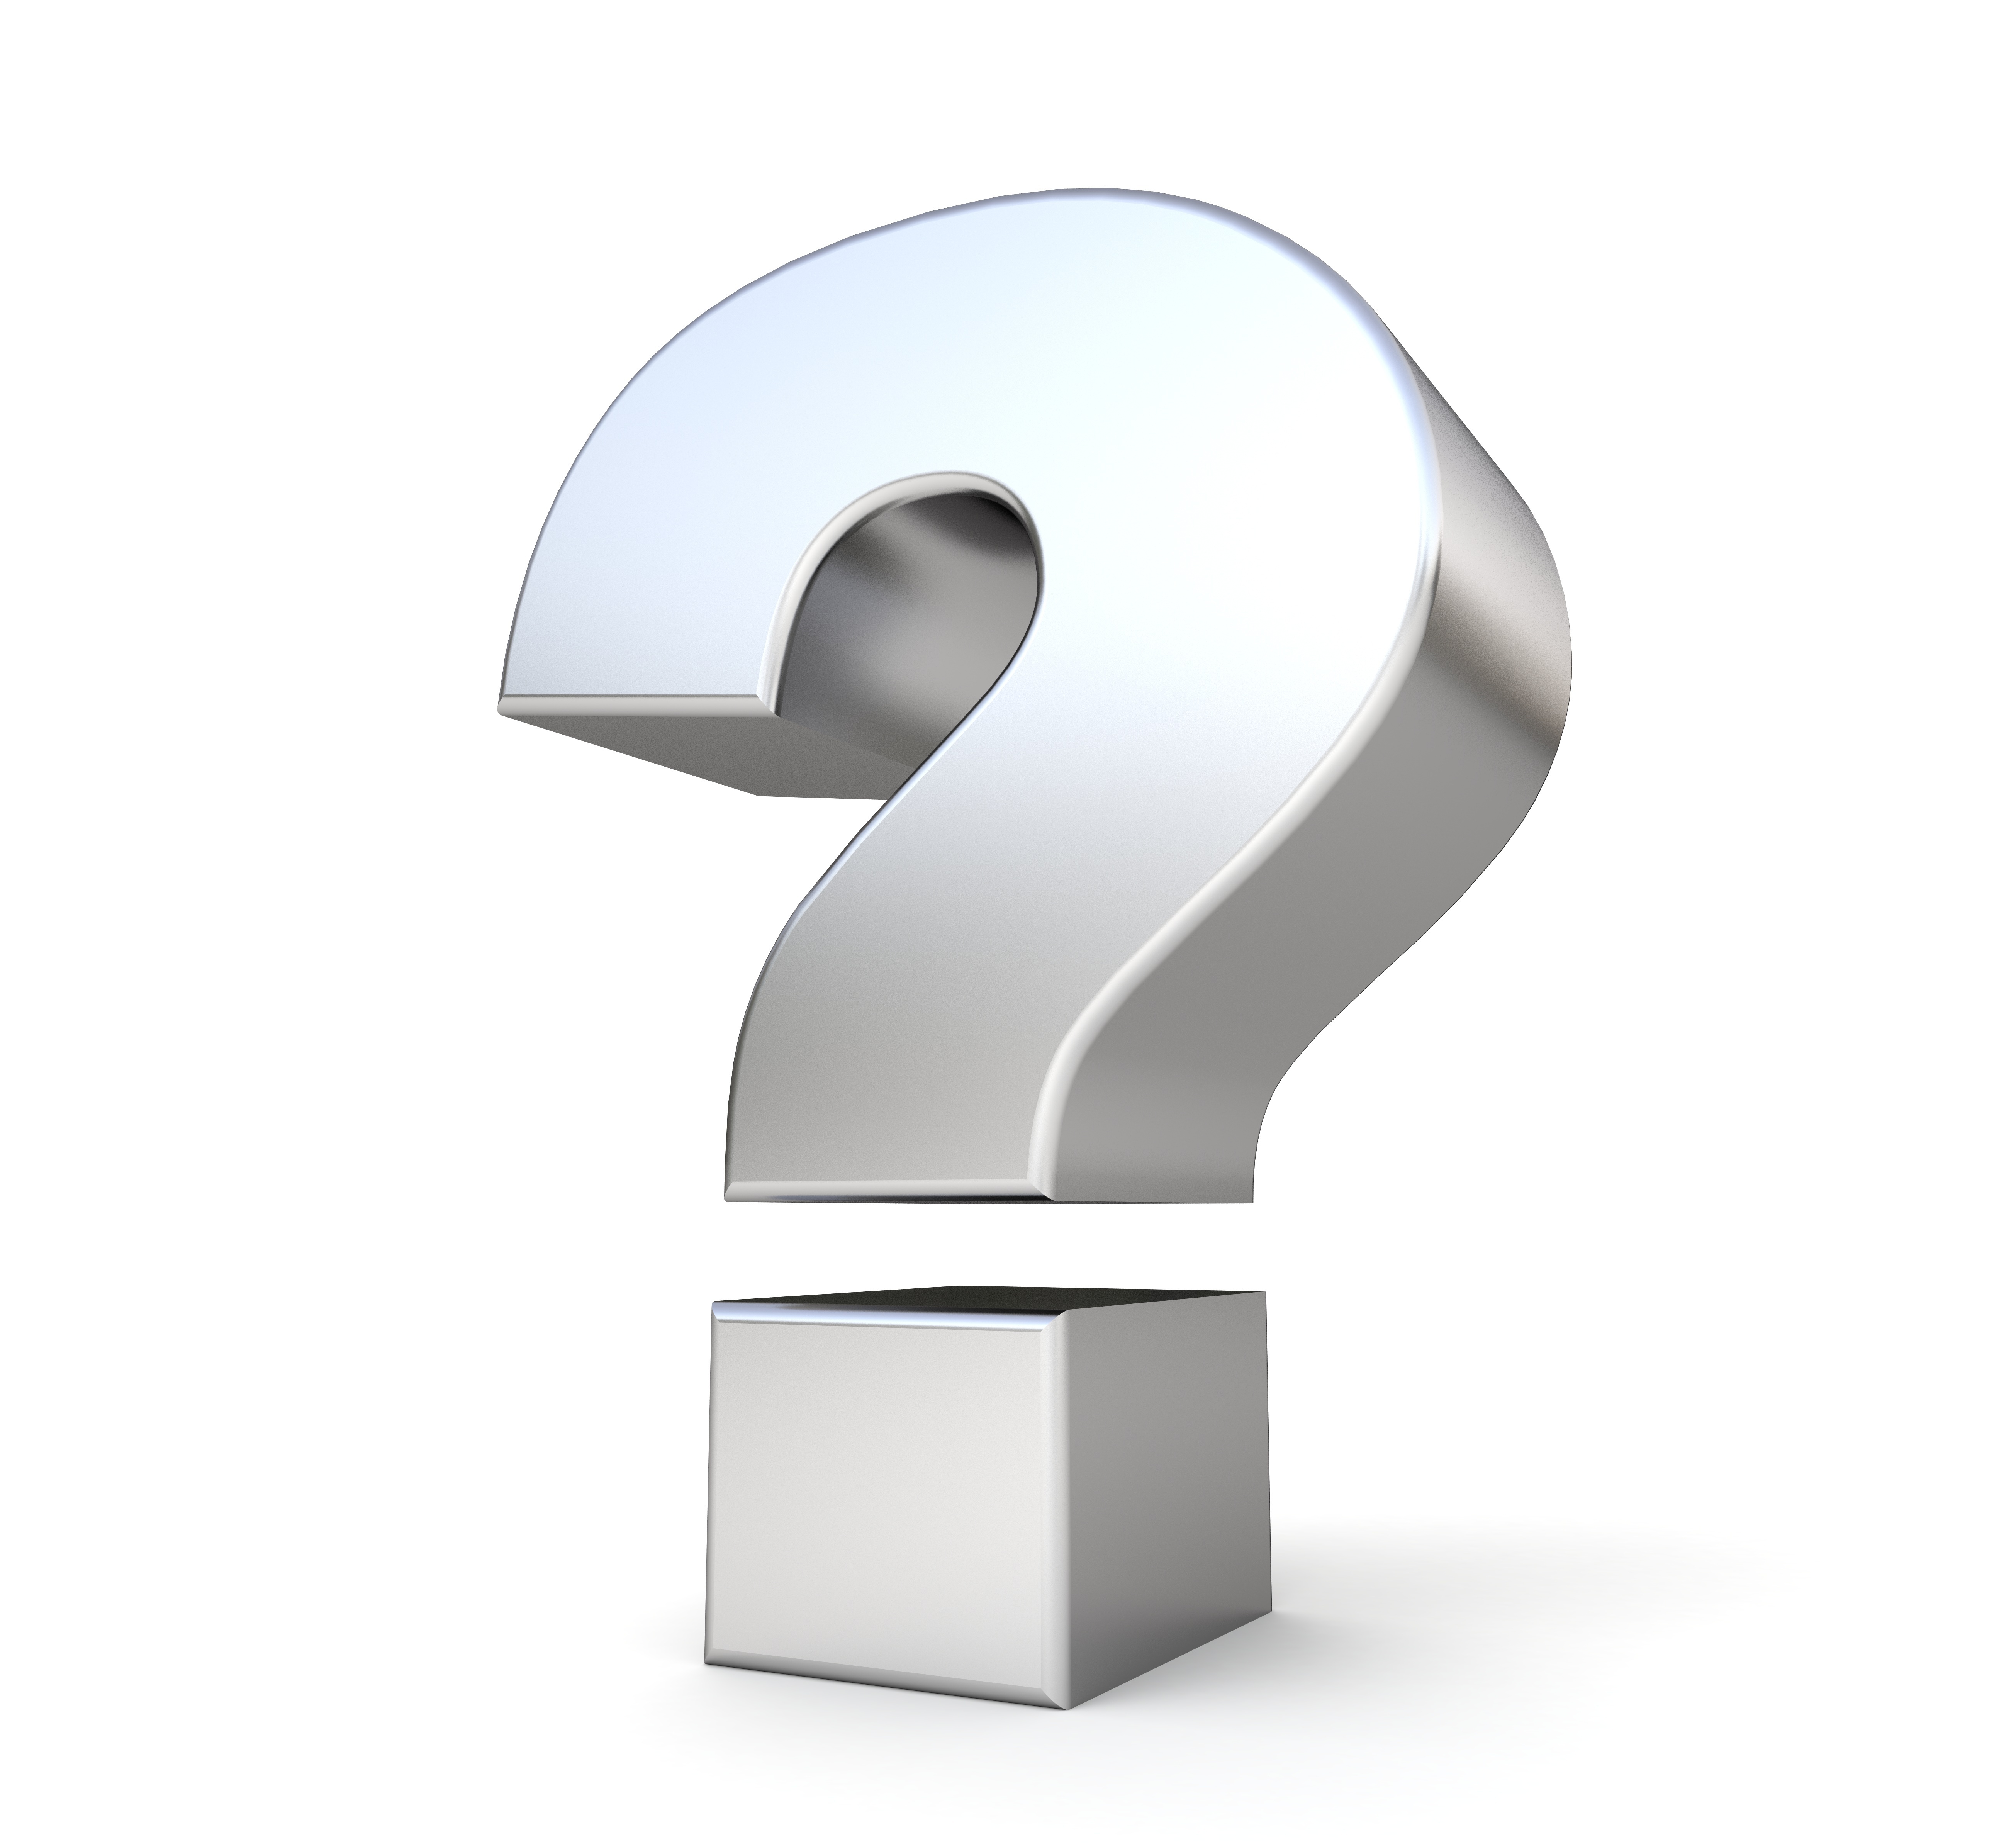 Free Question Mark Images, Download Free Question Mark Images png